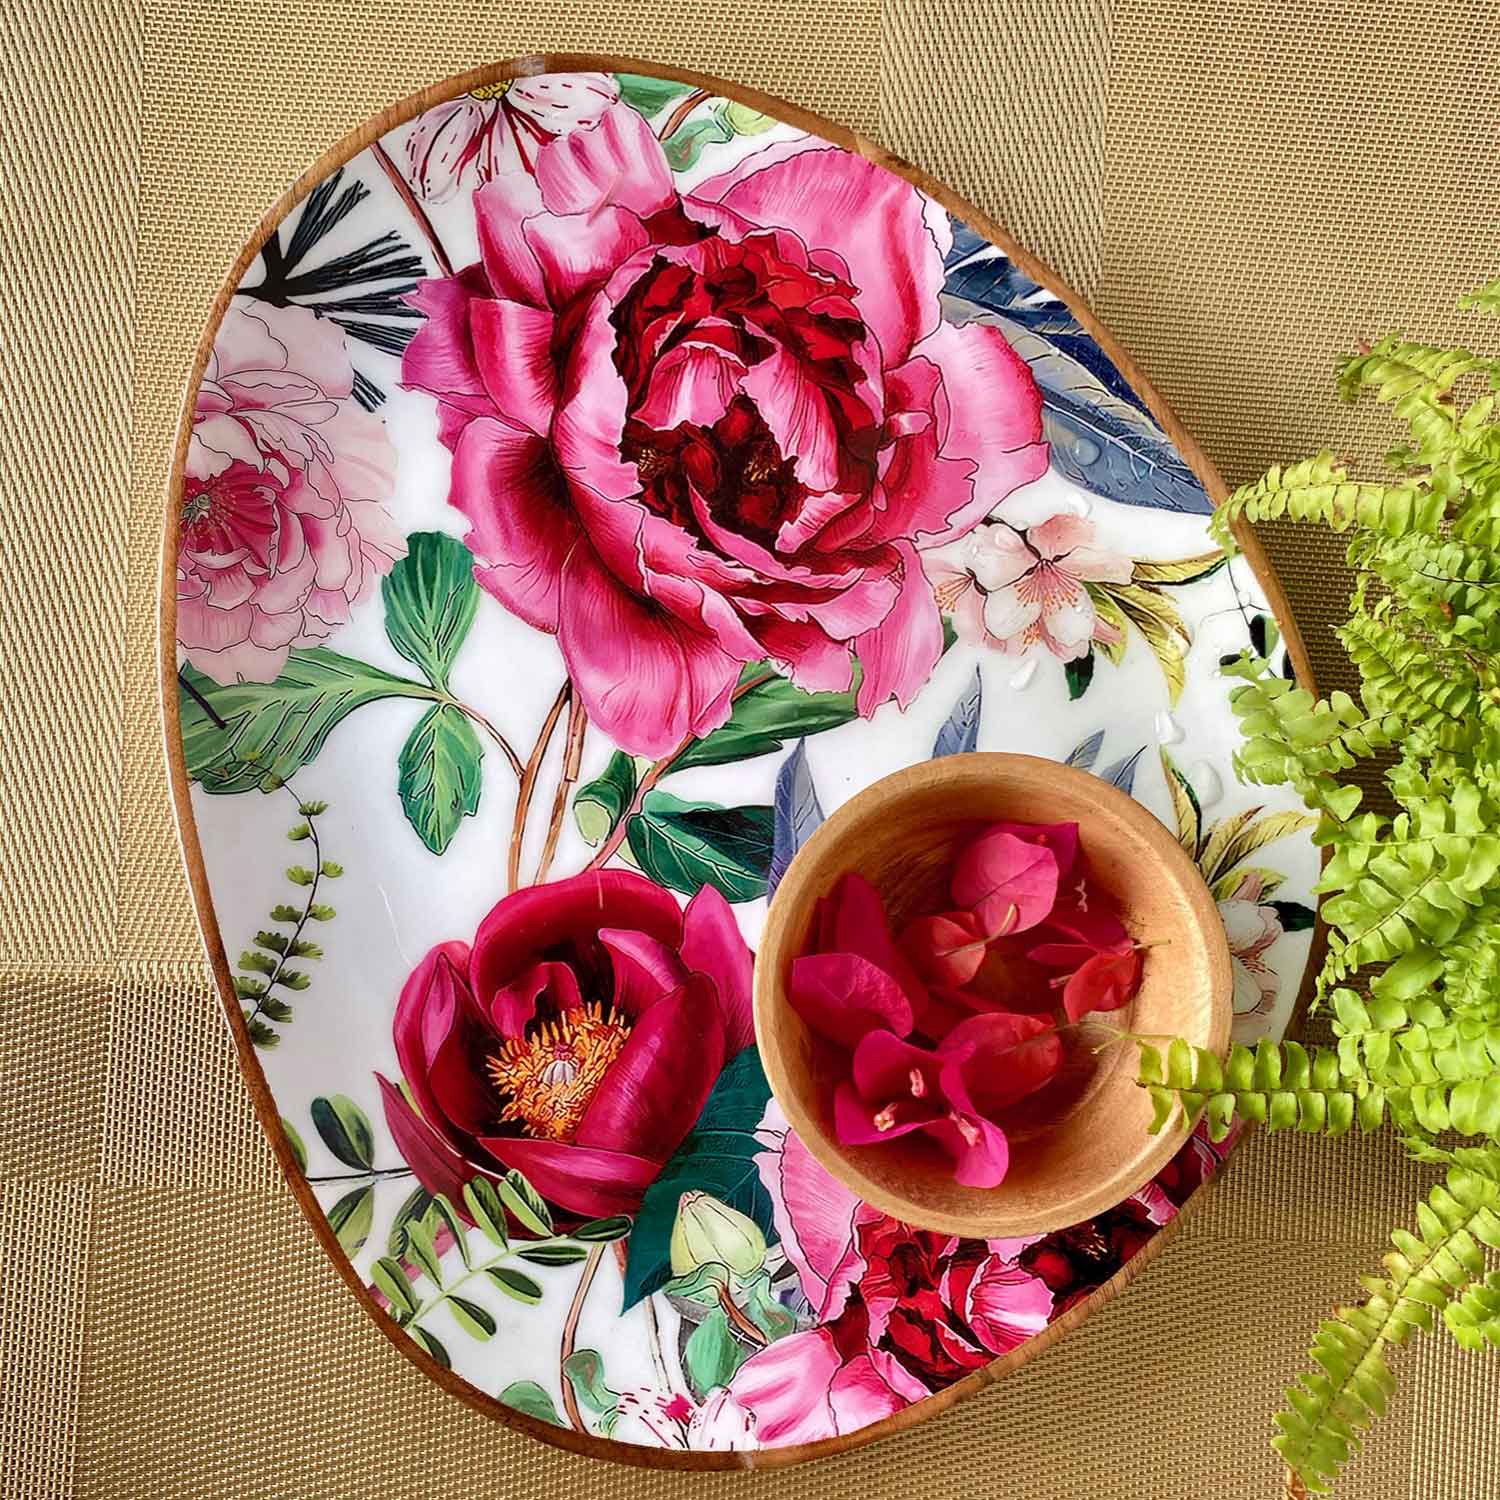 Oval Platters With Dip Bowls, Gift Set of 2 - Tudor Blooms